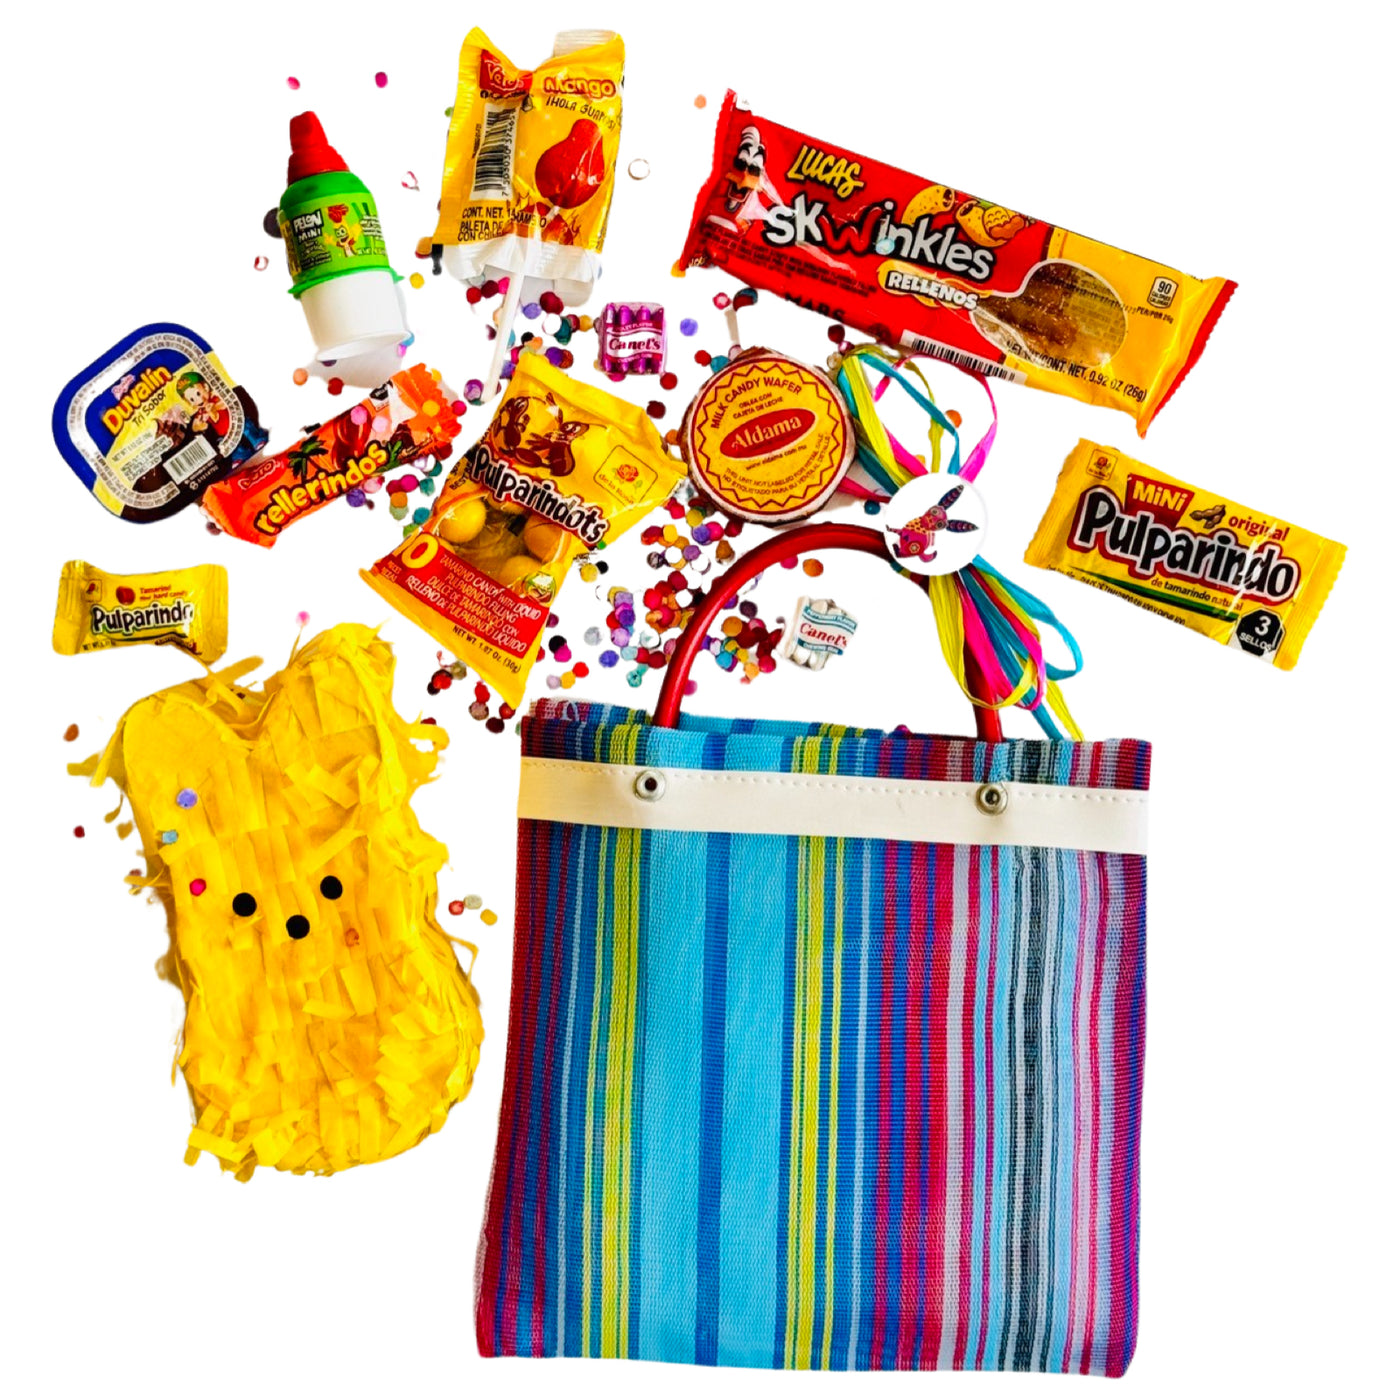 Colorful Mexican mercado bag with candy and two pieces of candy and a yellow peep bunny pinata by the side of it